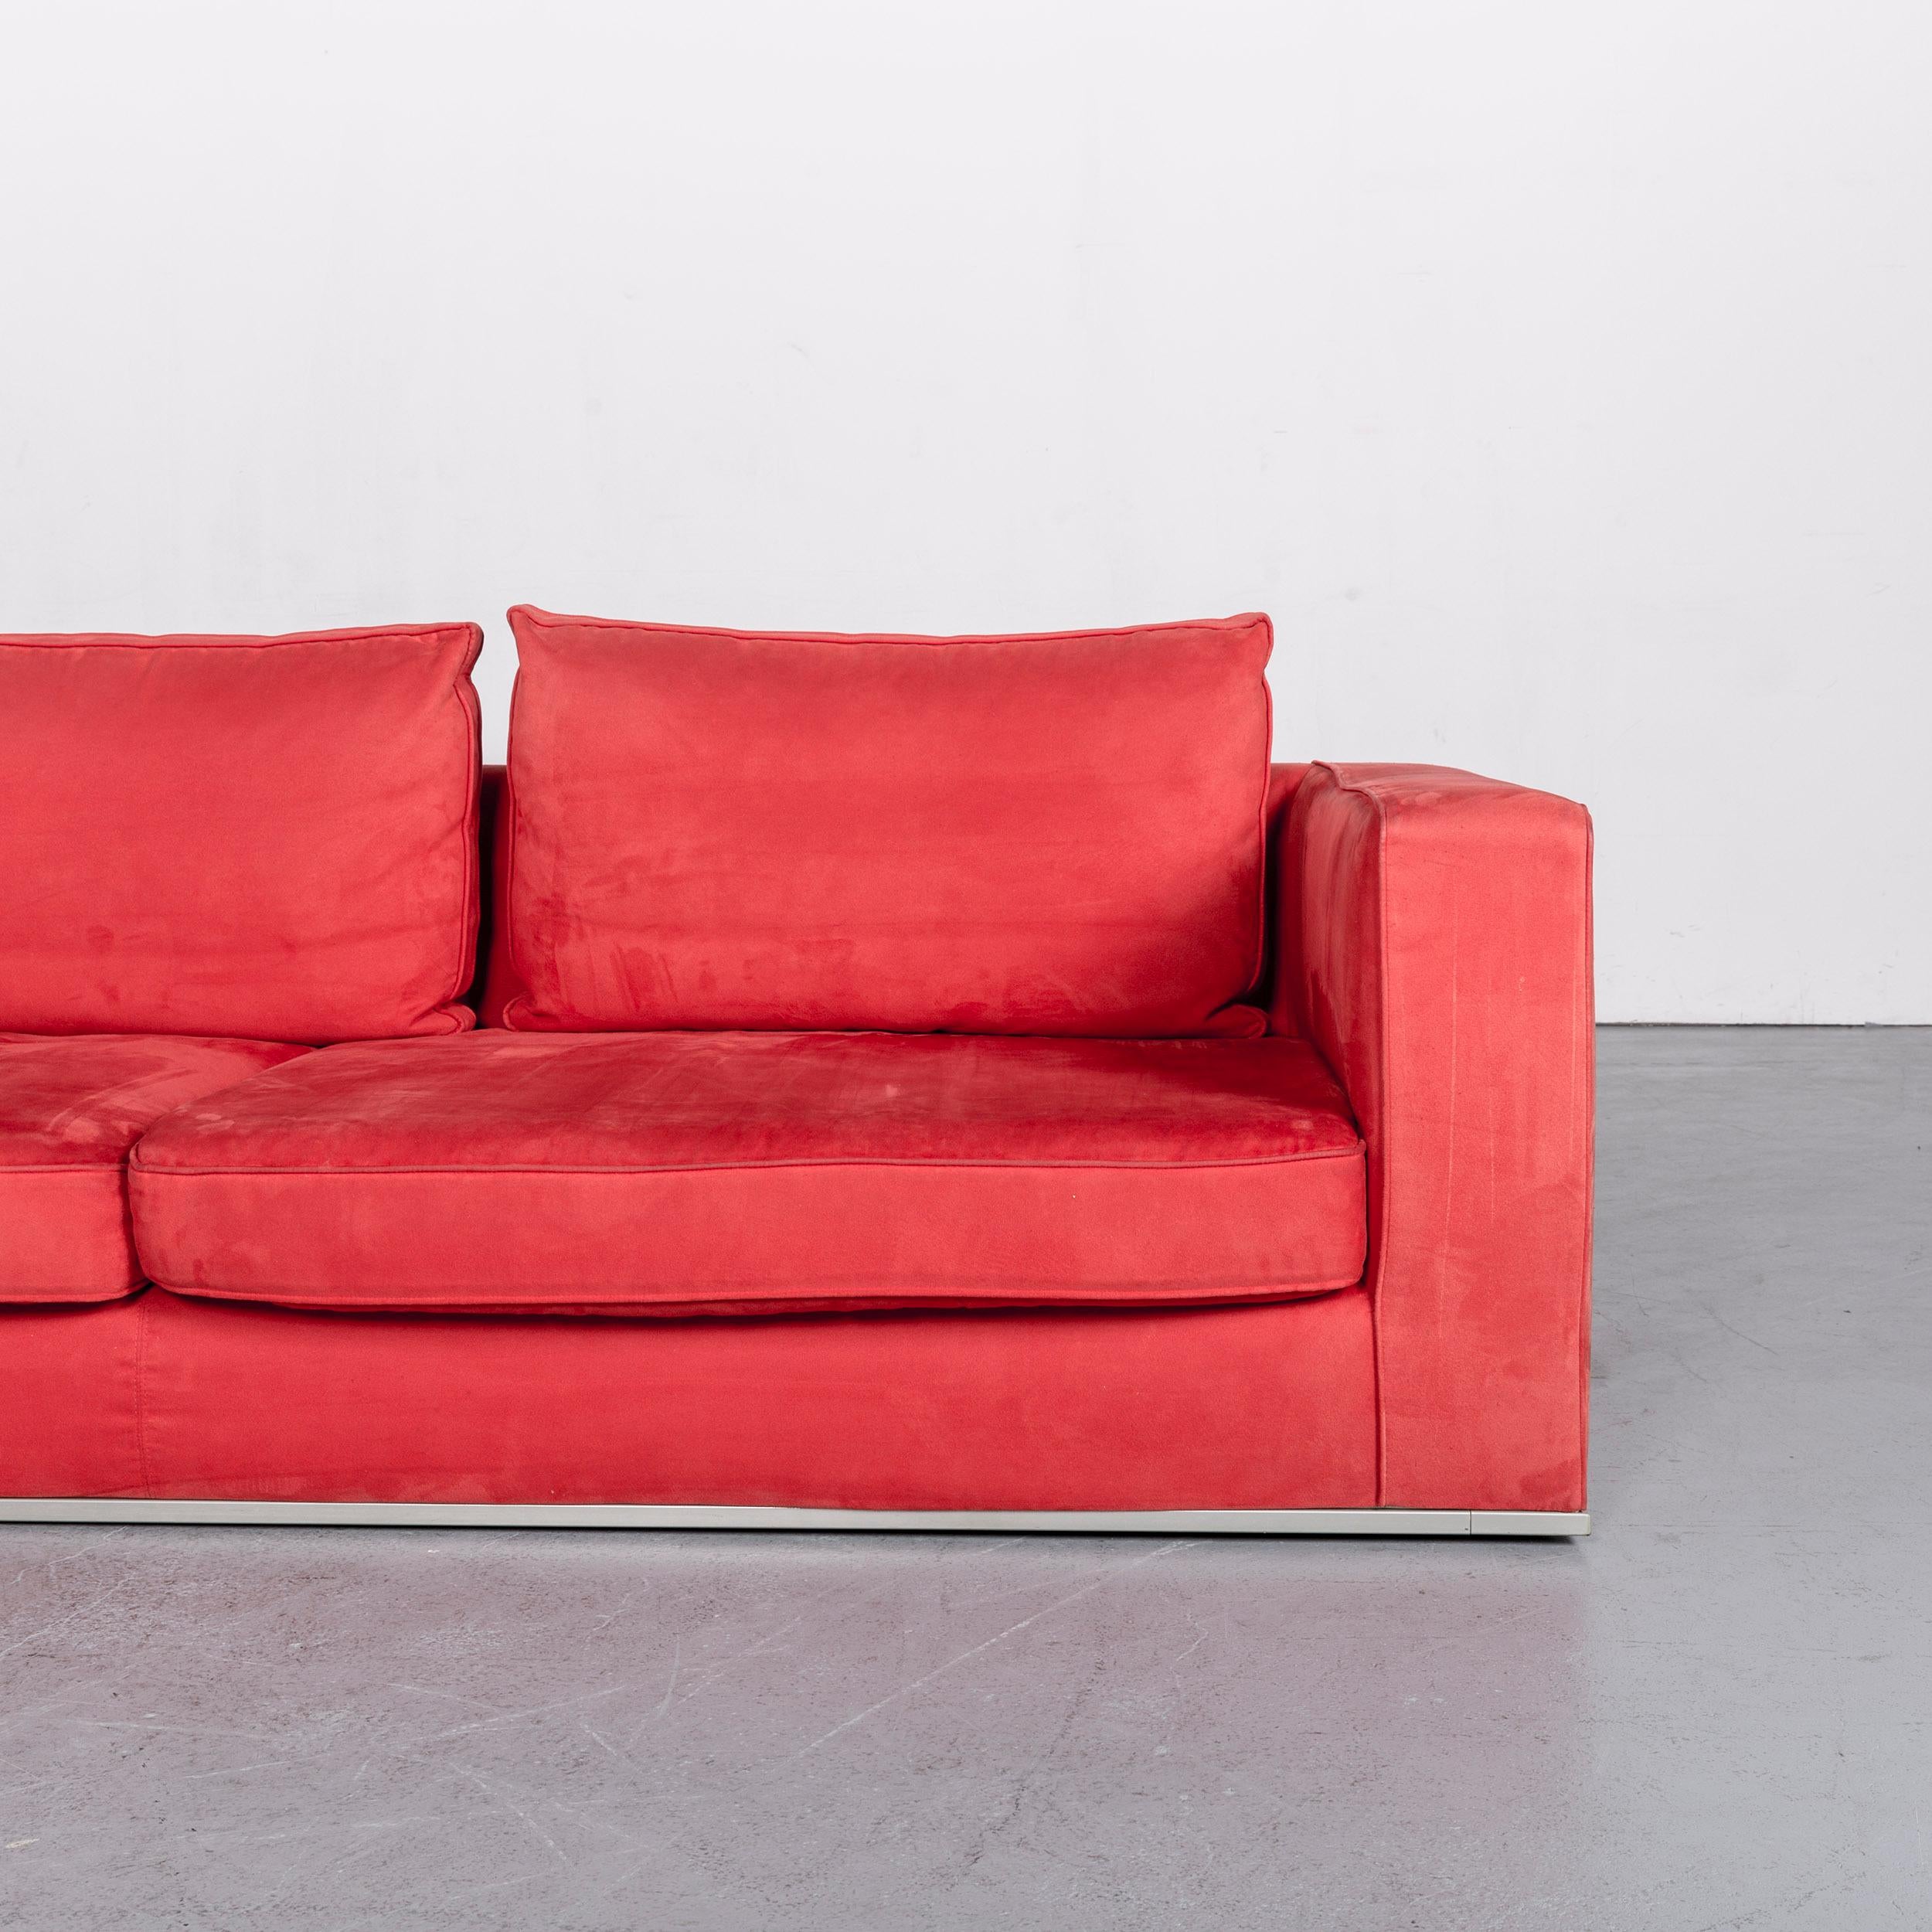 German Who's Perfect Fabric Corner-Sofa Red Couch For Sale